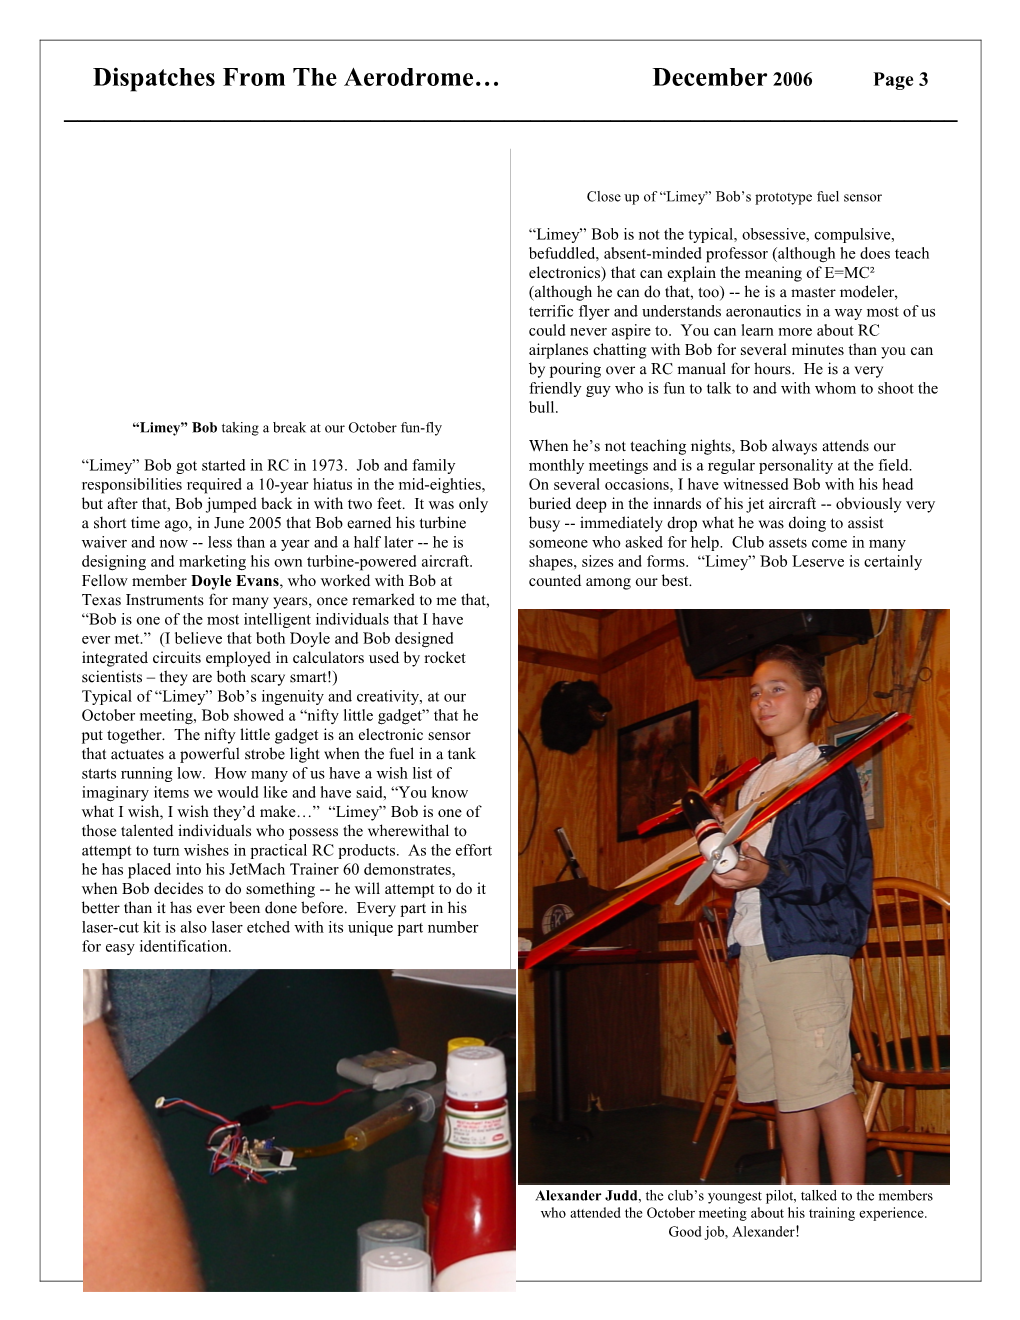 Dispatches from the Aerodrome December 2006 Page 5